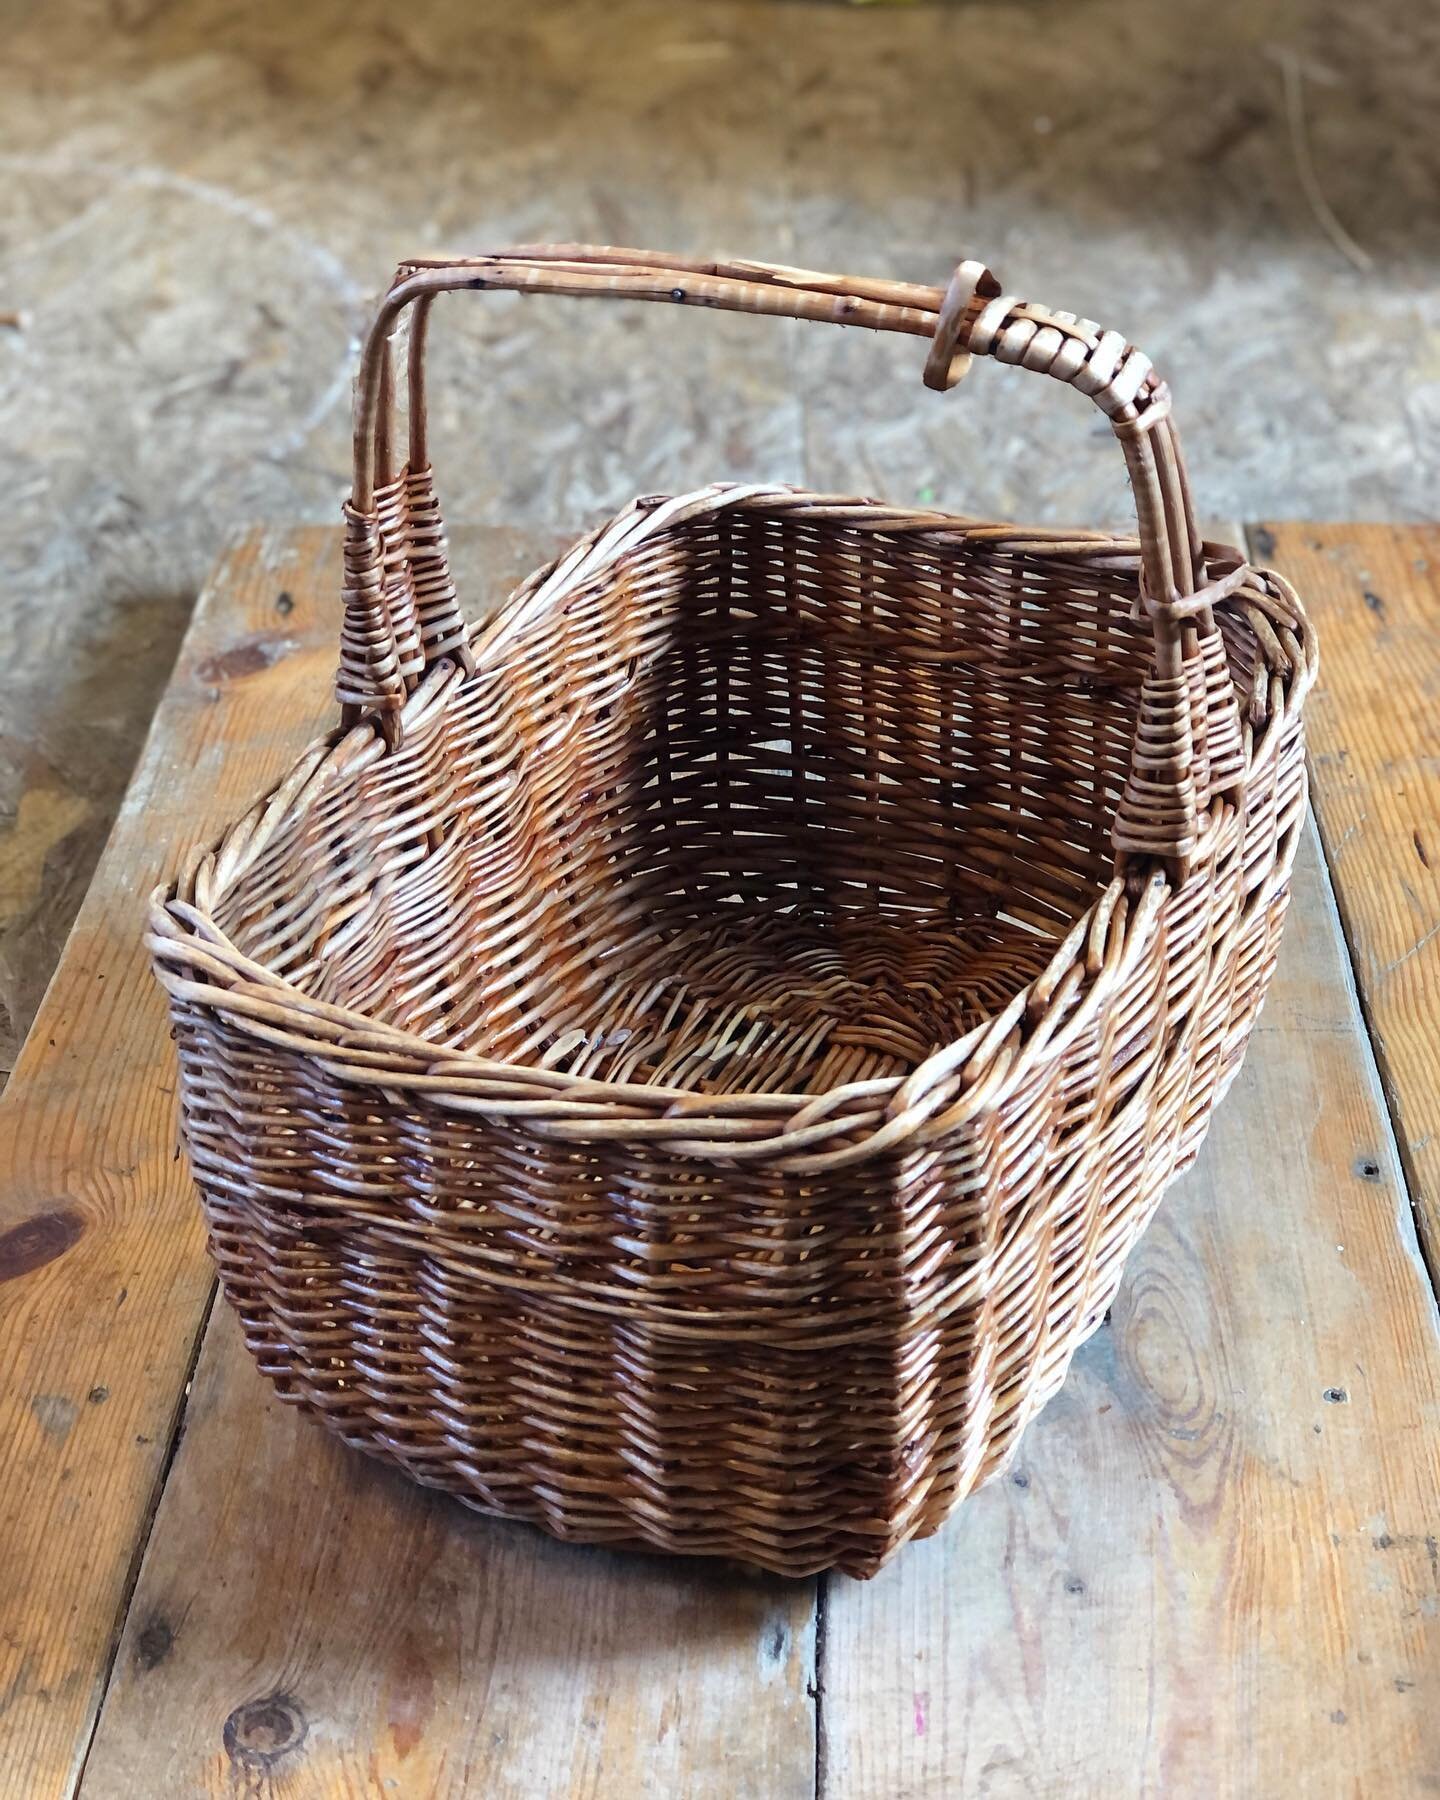 #repair job

delighted to fix the handle on this beautiful old basket that had belonged to my customer&rsquo;s mum. She had recently passed away but the basket held fond memories and the granddaughter liked to use it to go shopping like her gran did.